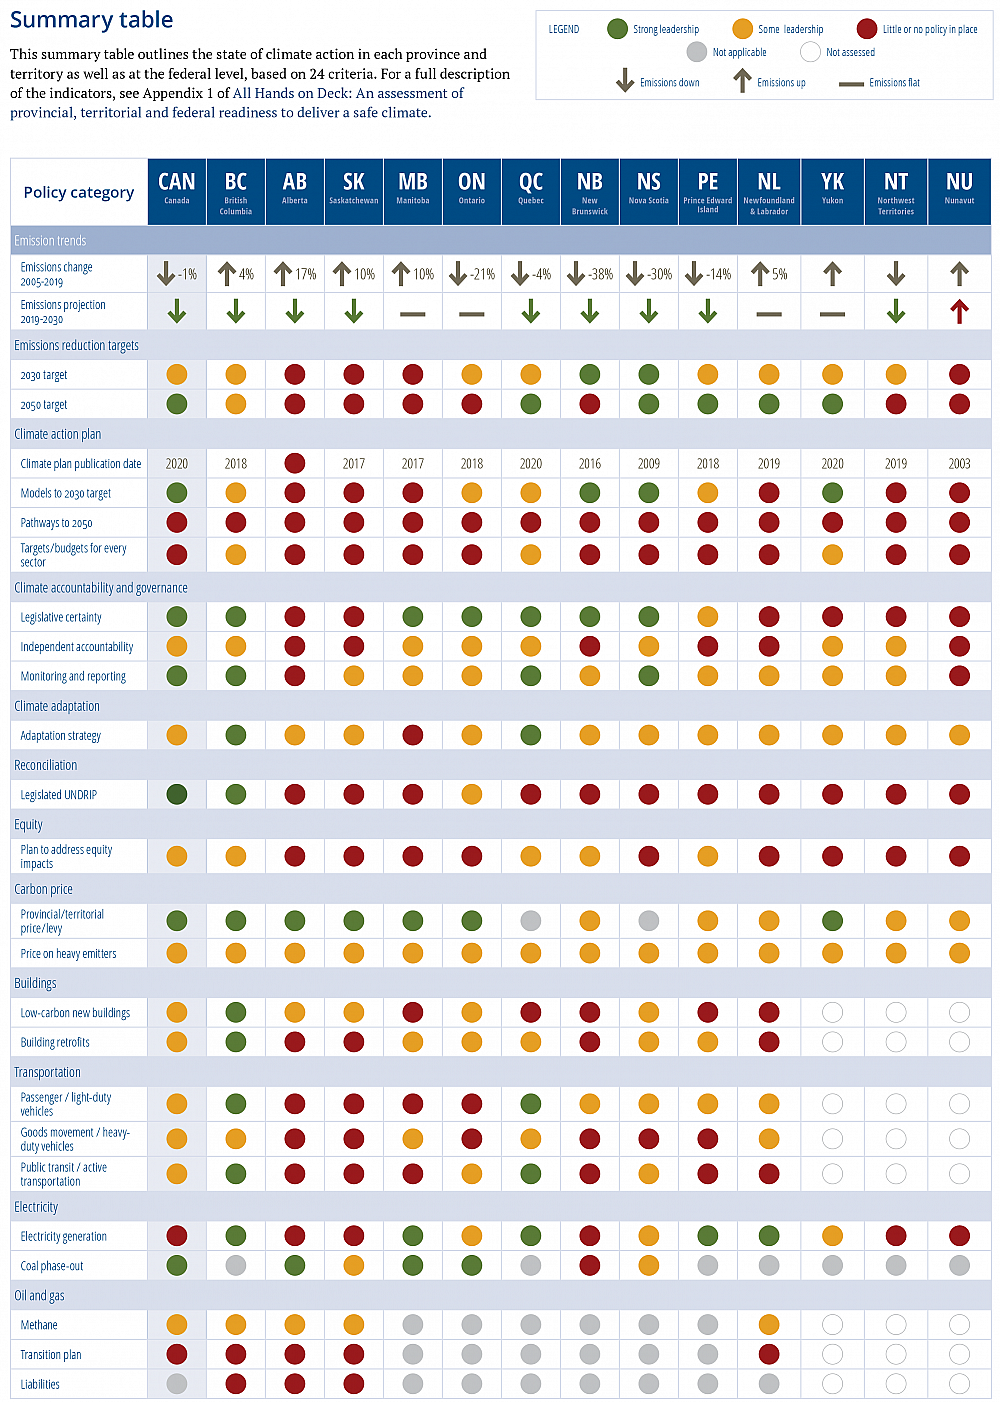 Summary table of provincial, territorial and federal indicators